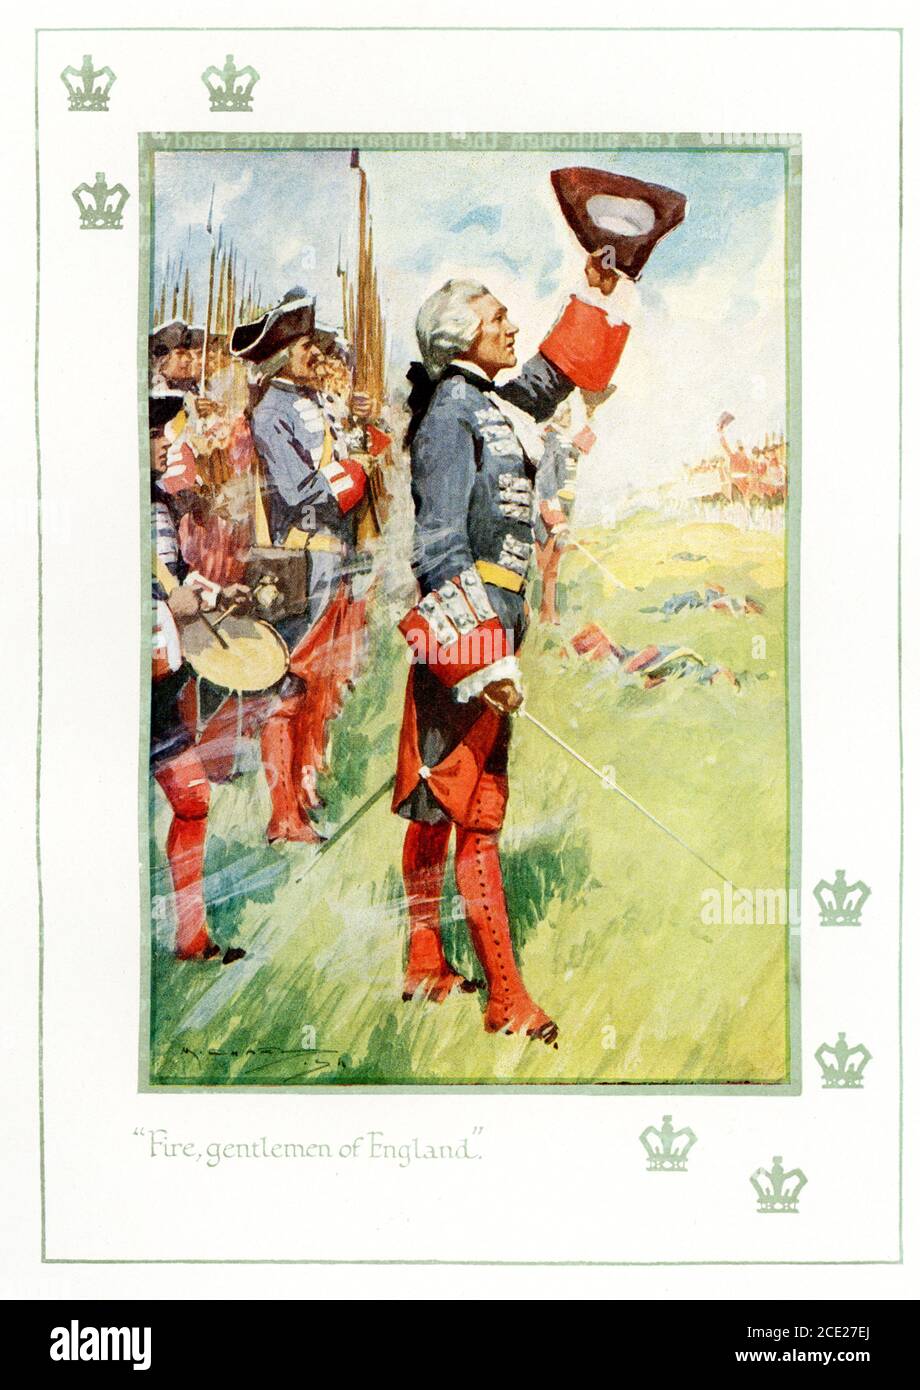 The caption reads: Fire gentlemen of England In time of Louis XV Battle of Fontenoy 1745. The Battle of Fontenoy (May 11, 1745) was a major engagement of the War of the Austrian Succession, fought between the forces of the Pragmatic Allies (mainly Dutch, British, and Hanoverian troops, as well a relatively small contingent of Austrians under the command of the Duke of Cumberland) and a French army under the command of King Louis XV of France, with actual field command held by Maurice de Saxe, commander of Louis XV's forces in the Low Countries. Stock Photo